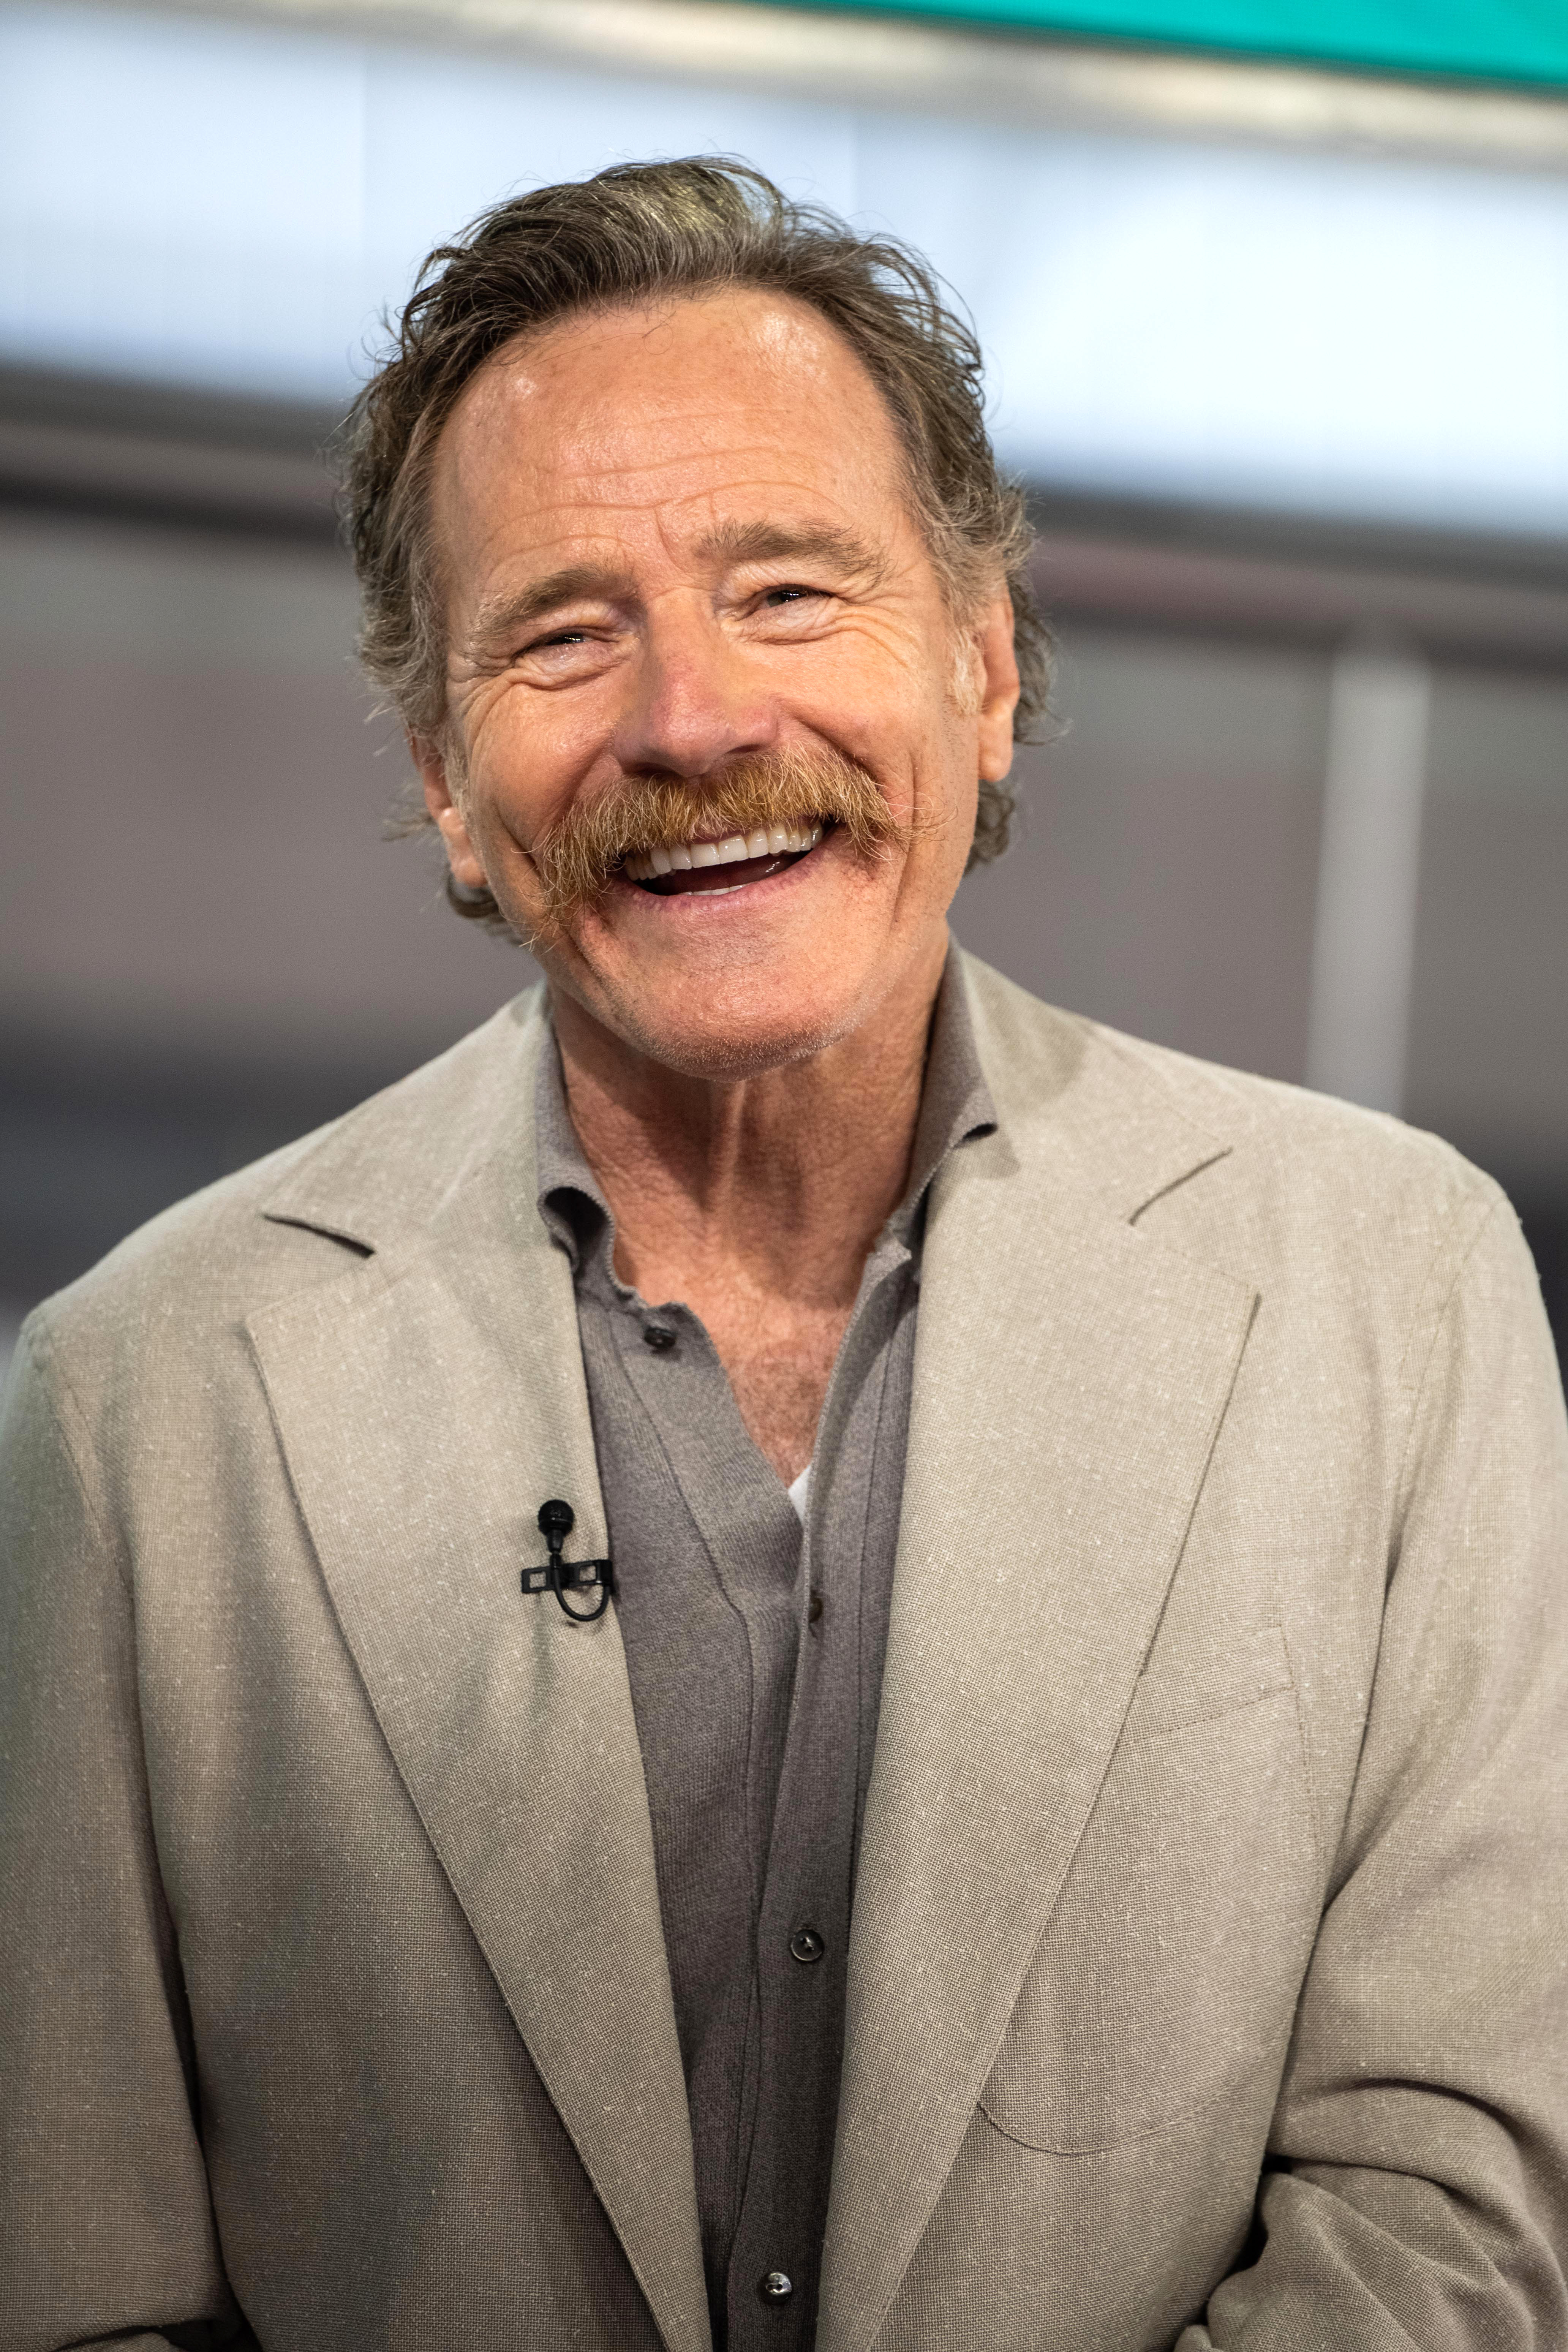 The meteorologist gushed over how nice Bryan Cranston was to have on the show